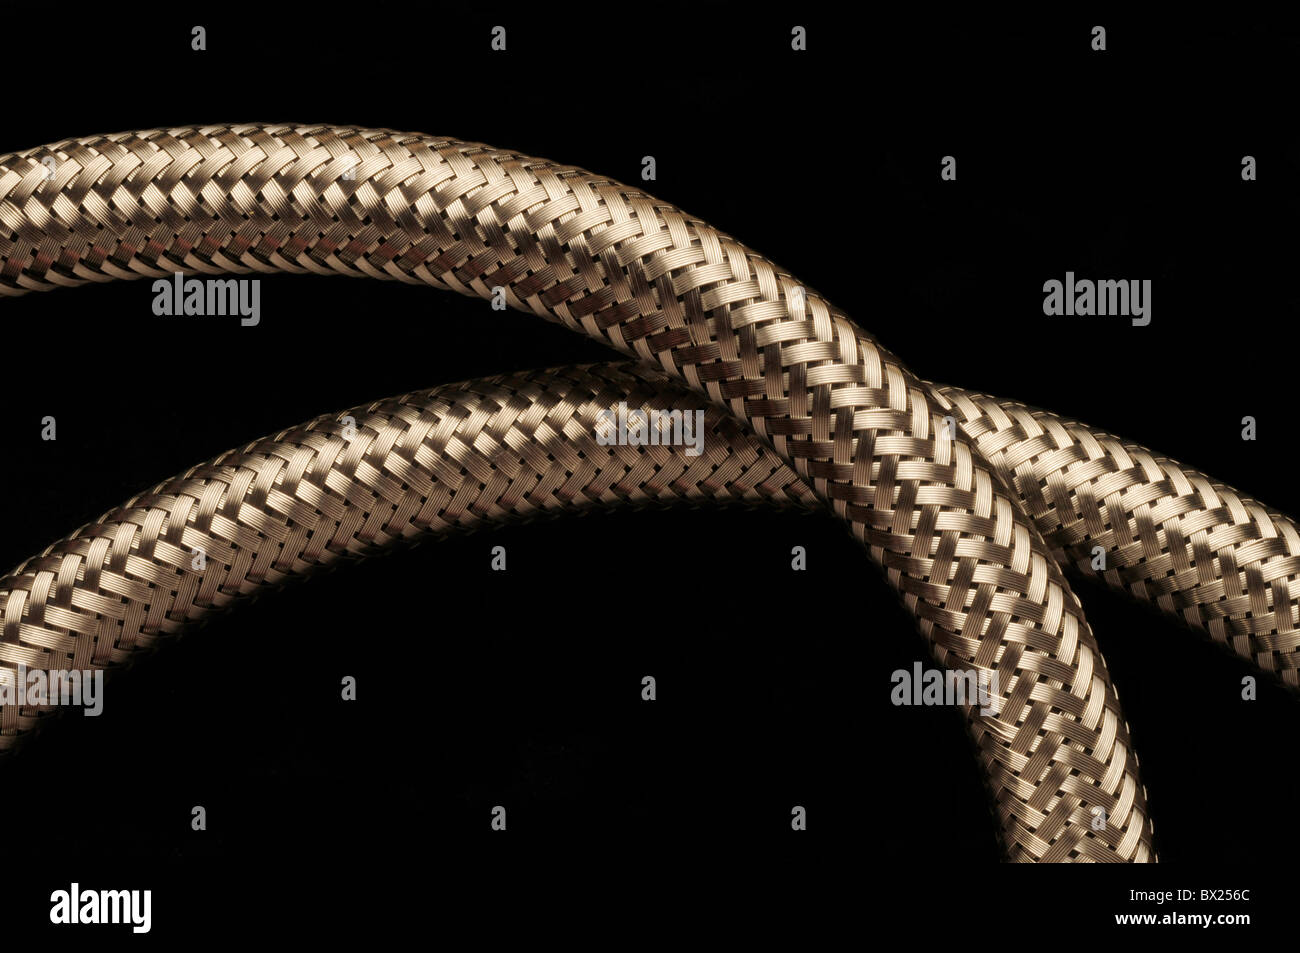 Two flexible metallic stainless steel piping tubes against black background Stock Photo